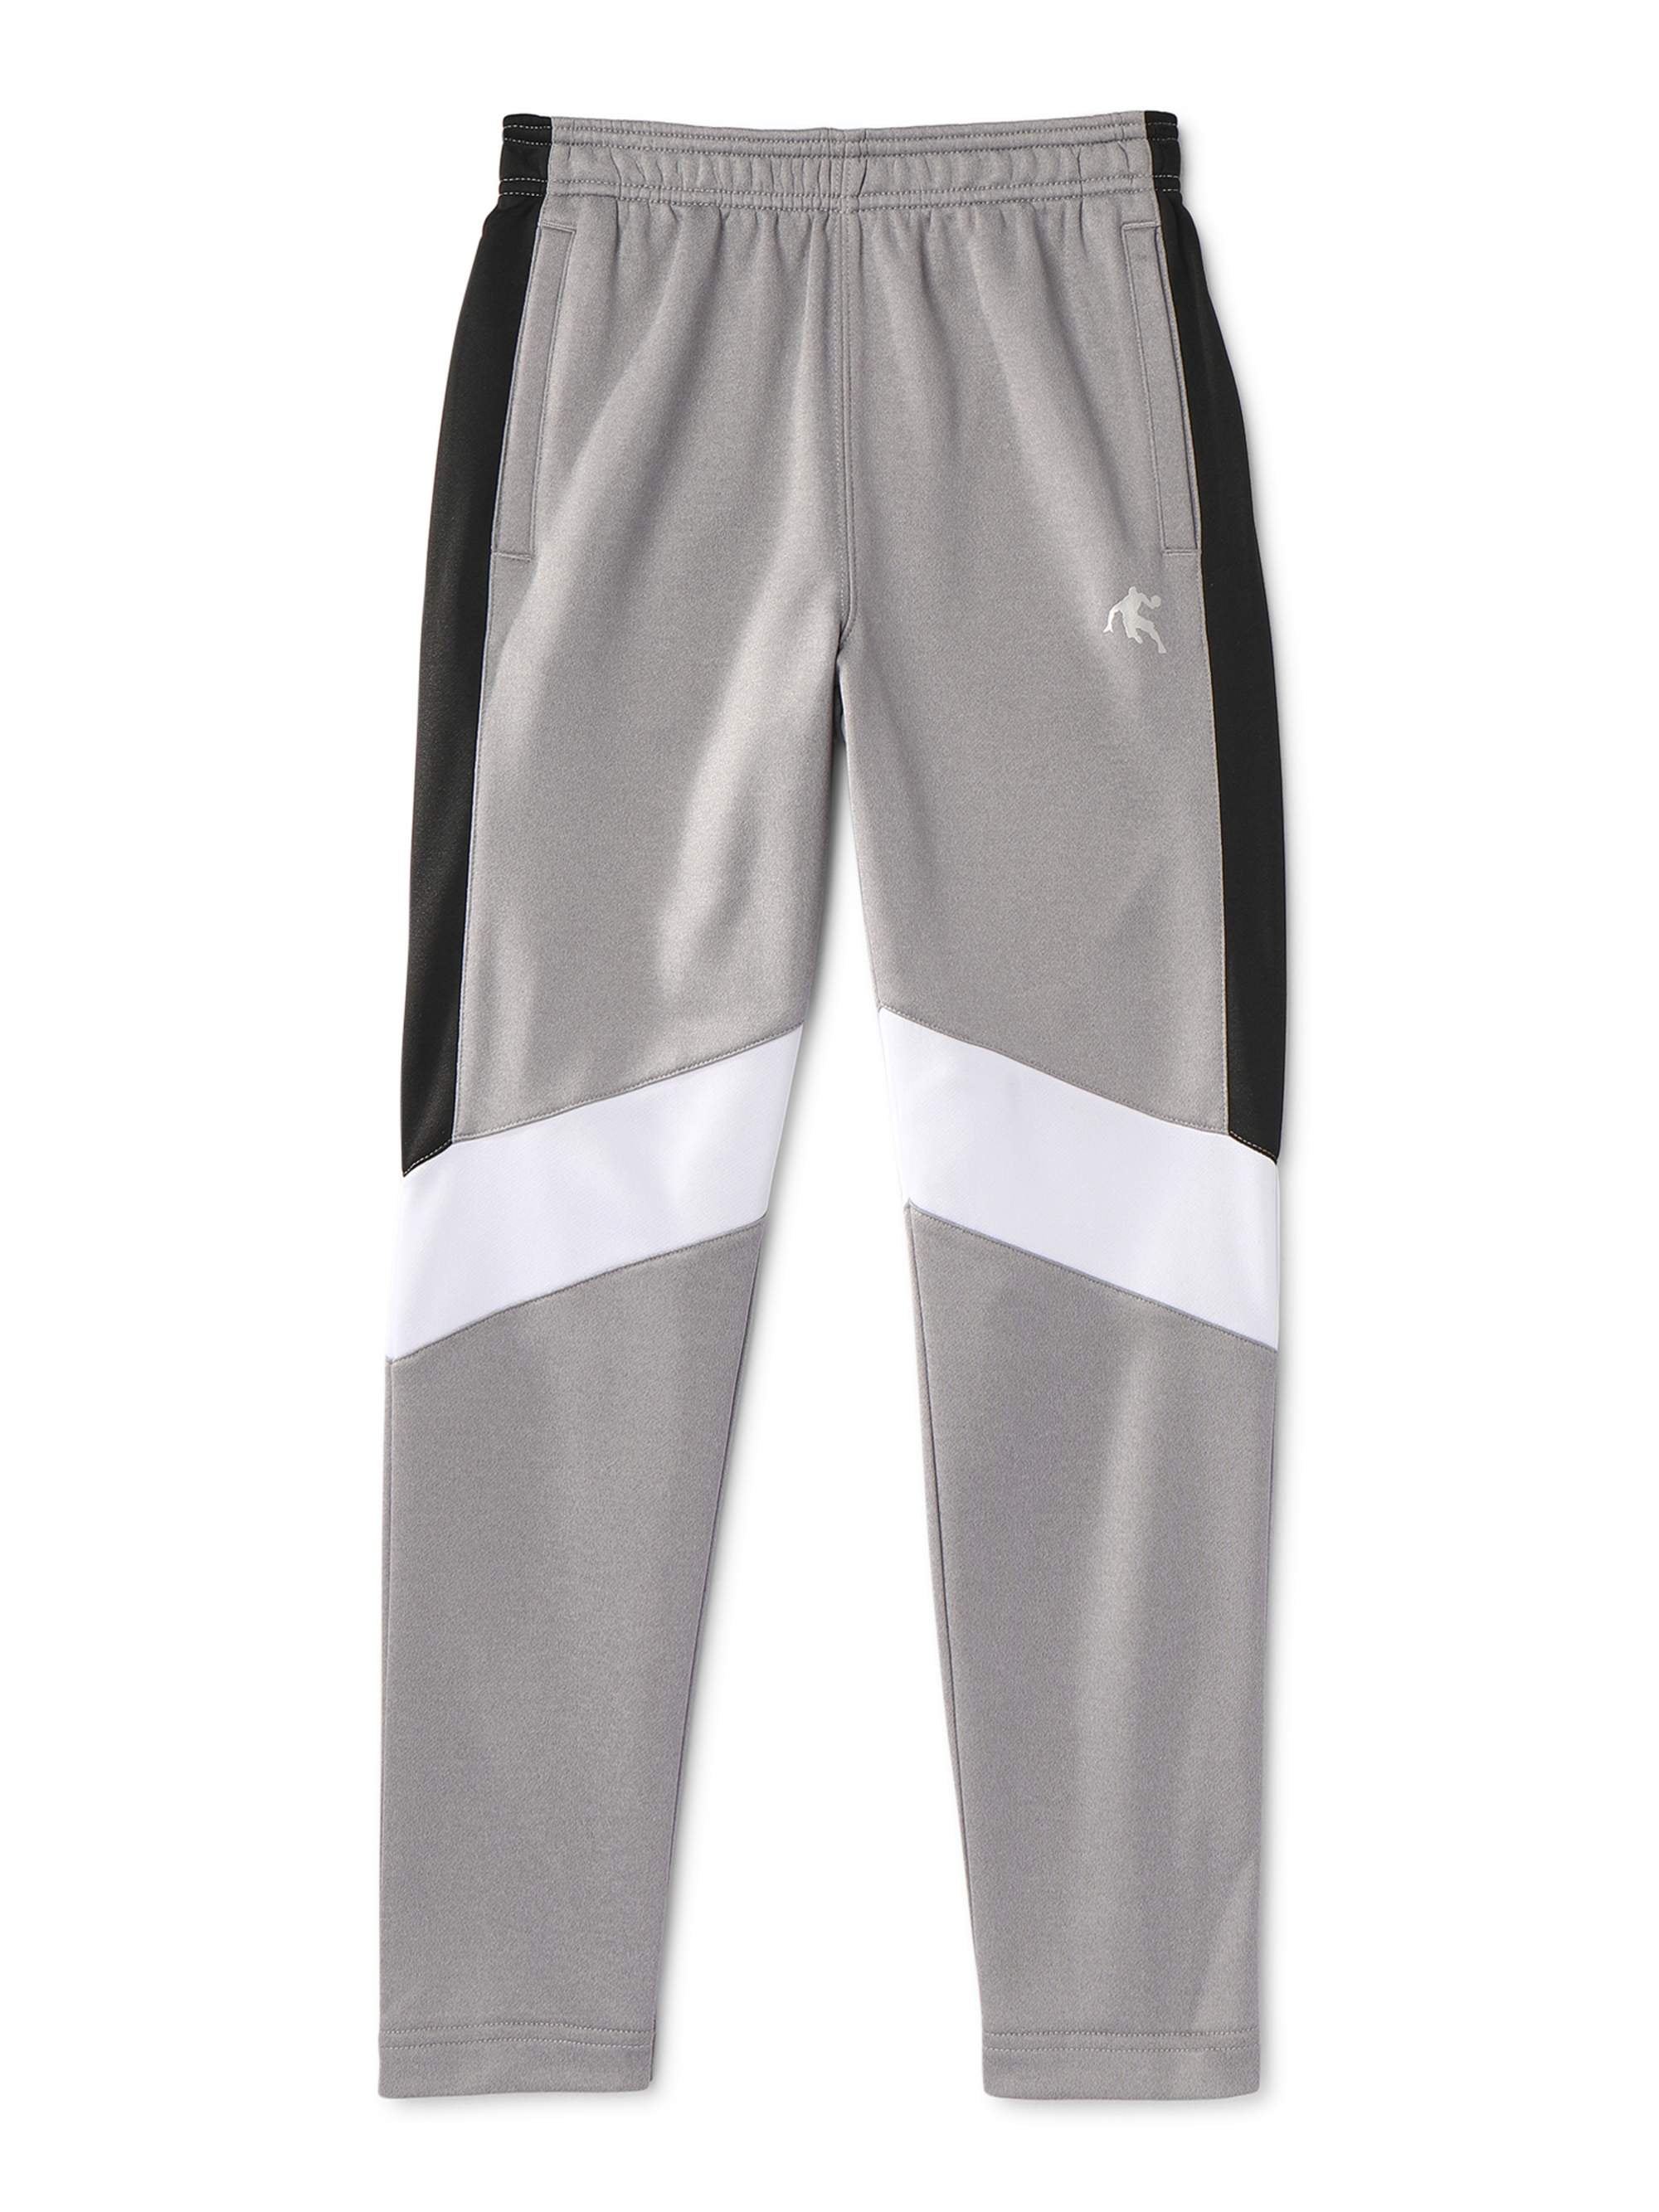 AND1 - AND1 Boys Game On Active Pants, Sizes 4-18 - Walmart.com ...